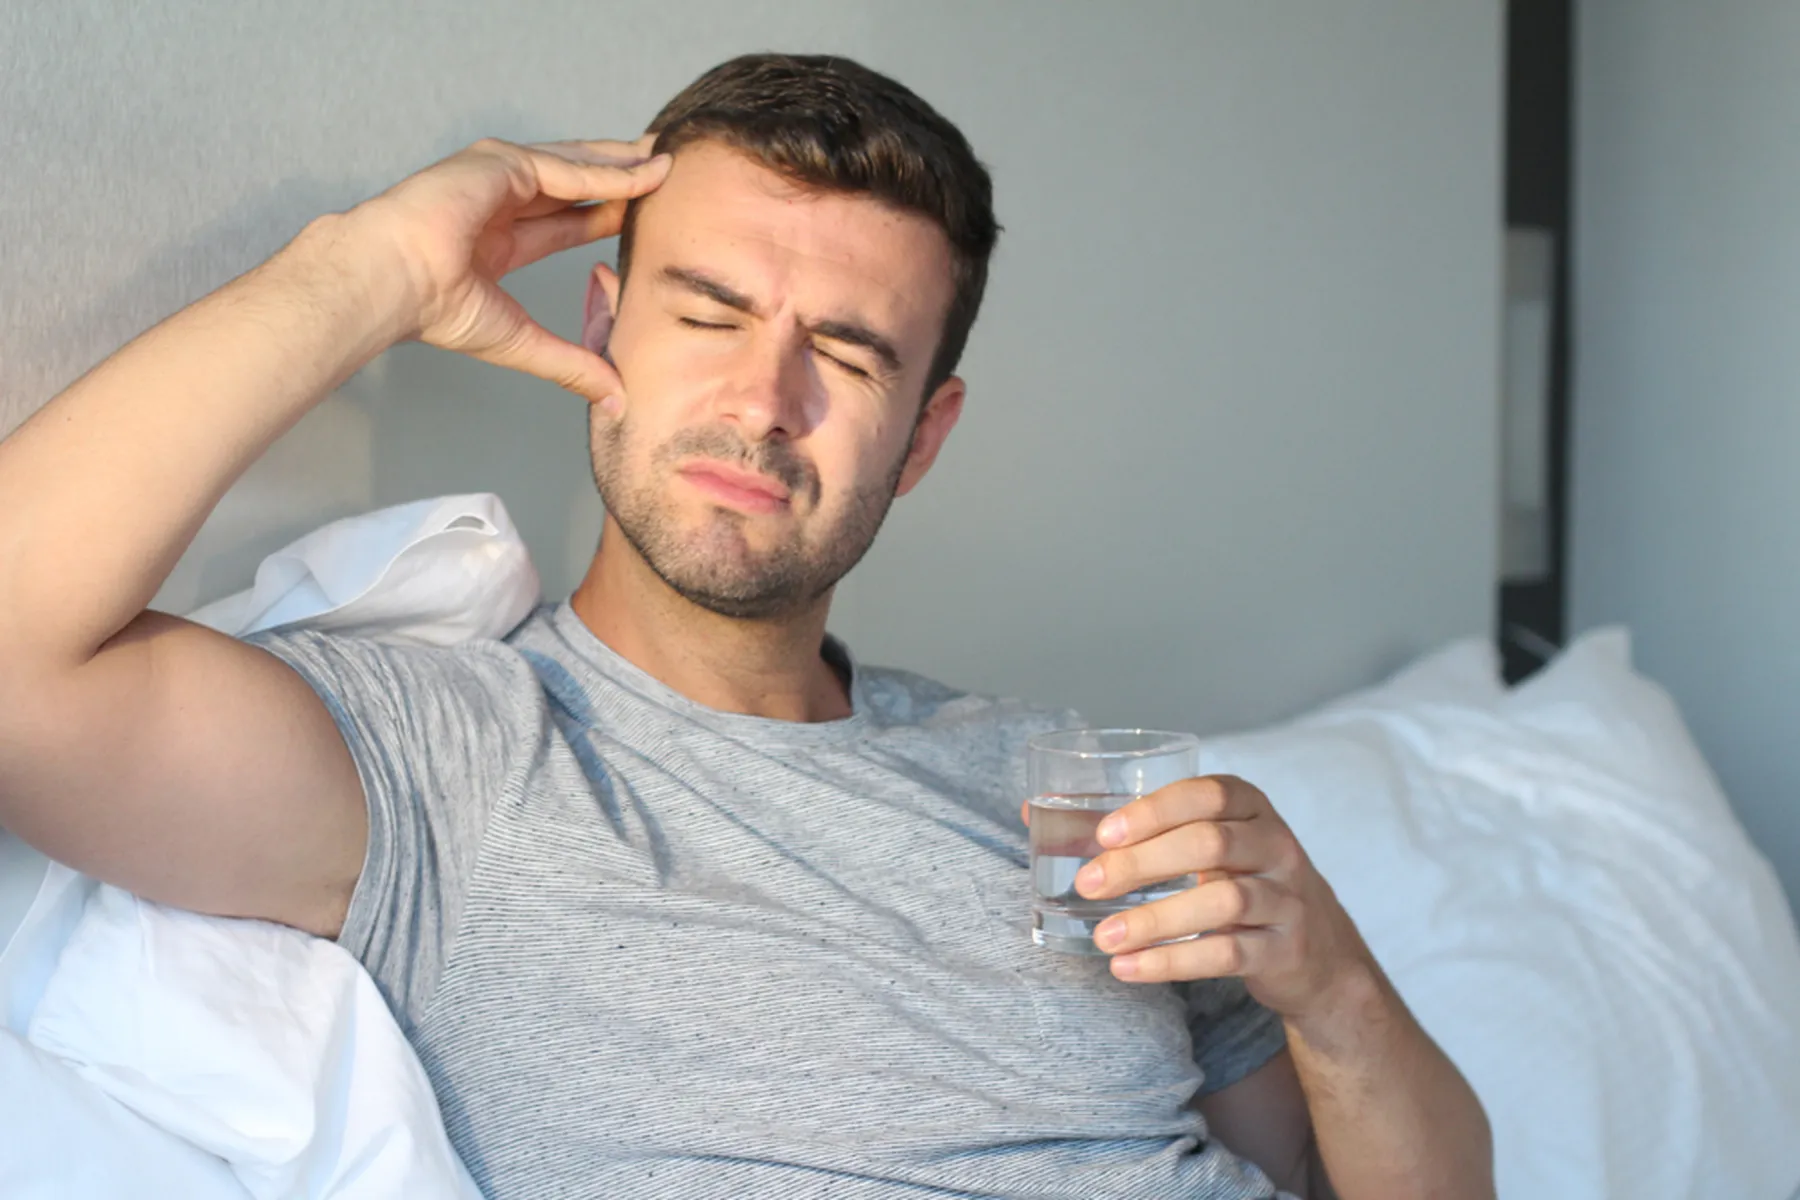 A man sits on his bed and holds his head in one hand and a glass of water in the other.